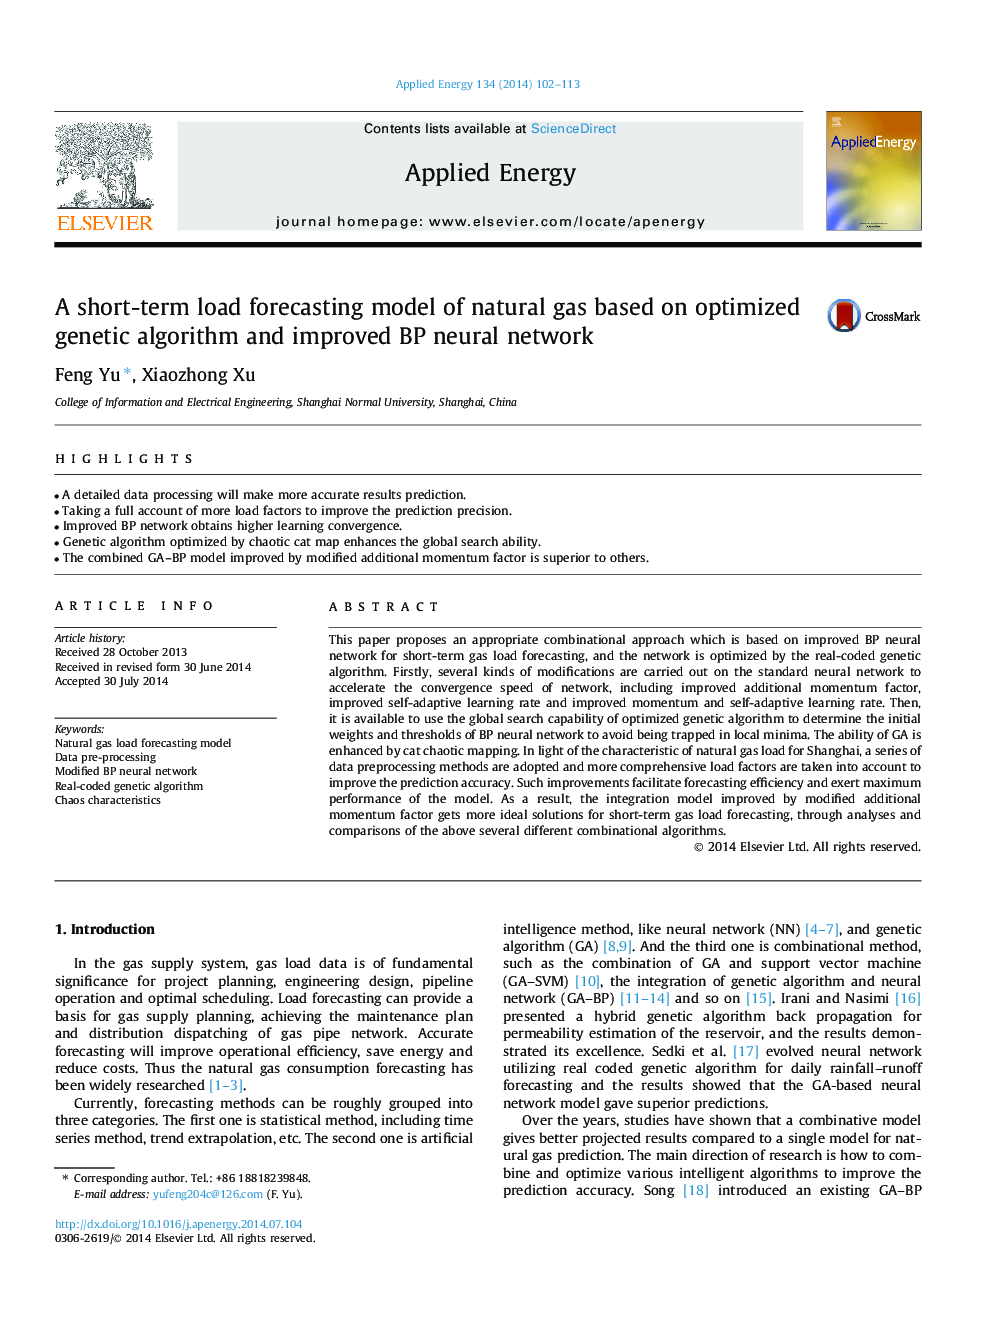 A short-term load forecasting model of natural gas based on optimized genetic algorithm and improved BP neural network